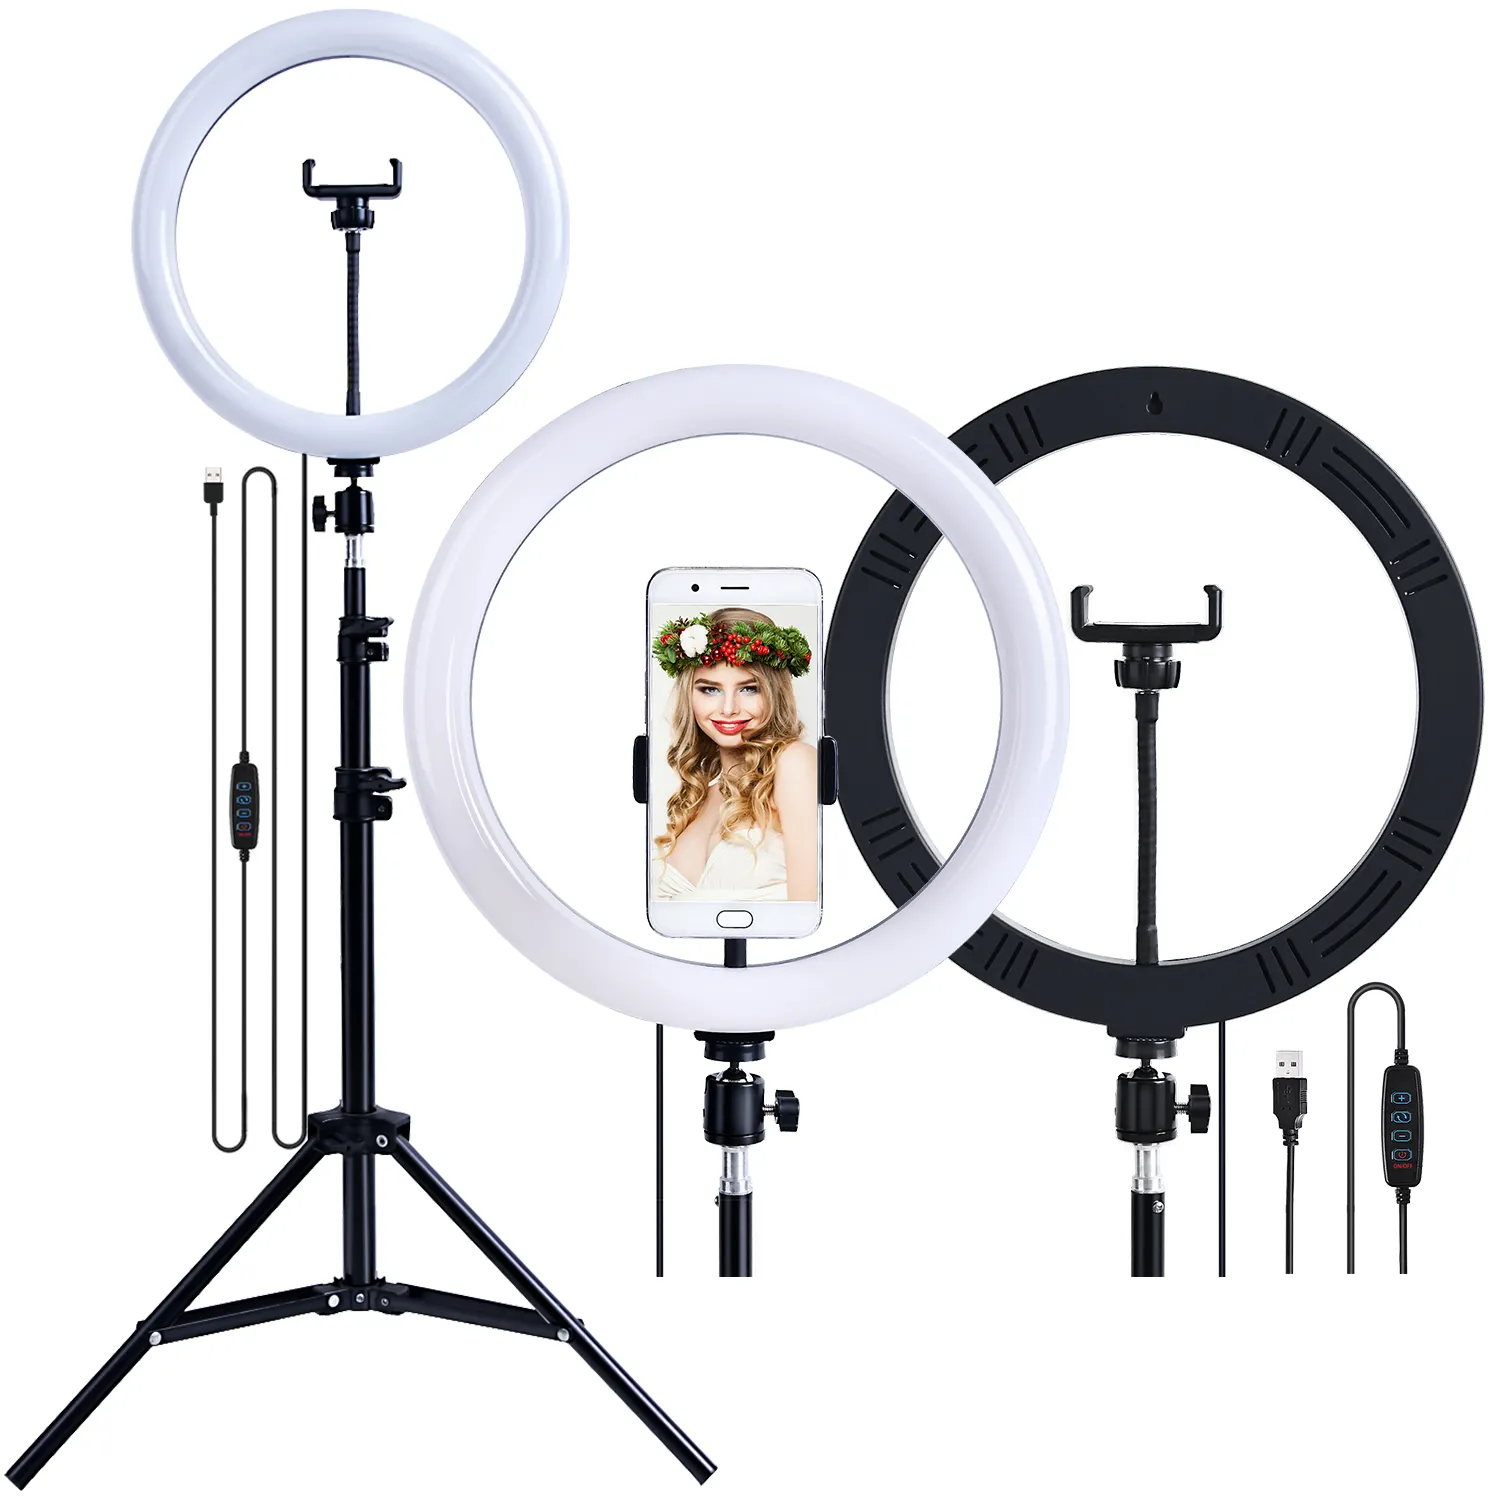 Hot sell 10 Inch 26 cm Fill Ring lamp led ring light with tripod stand and Phone holder for Selfie Makeup Video live streaming